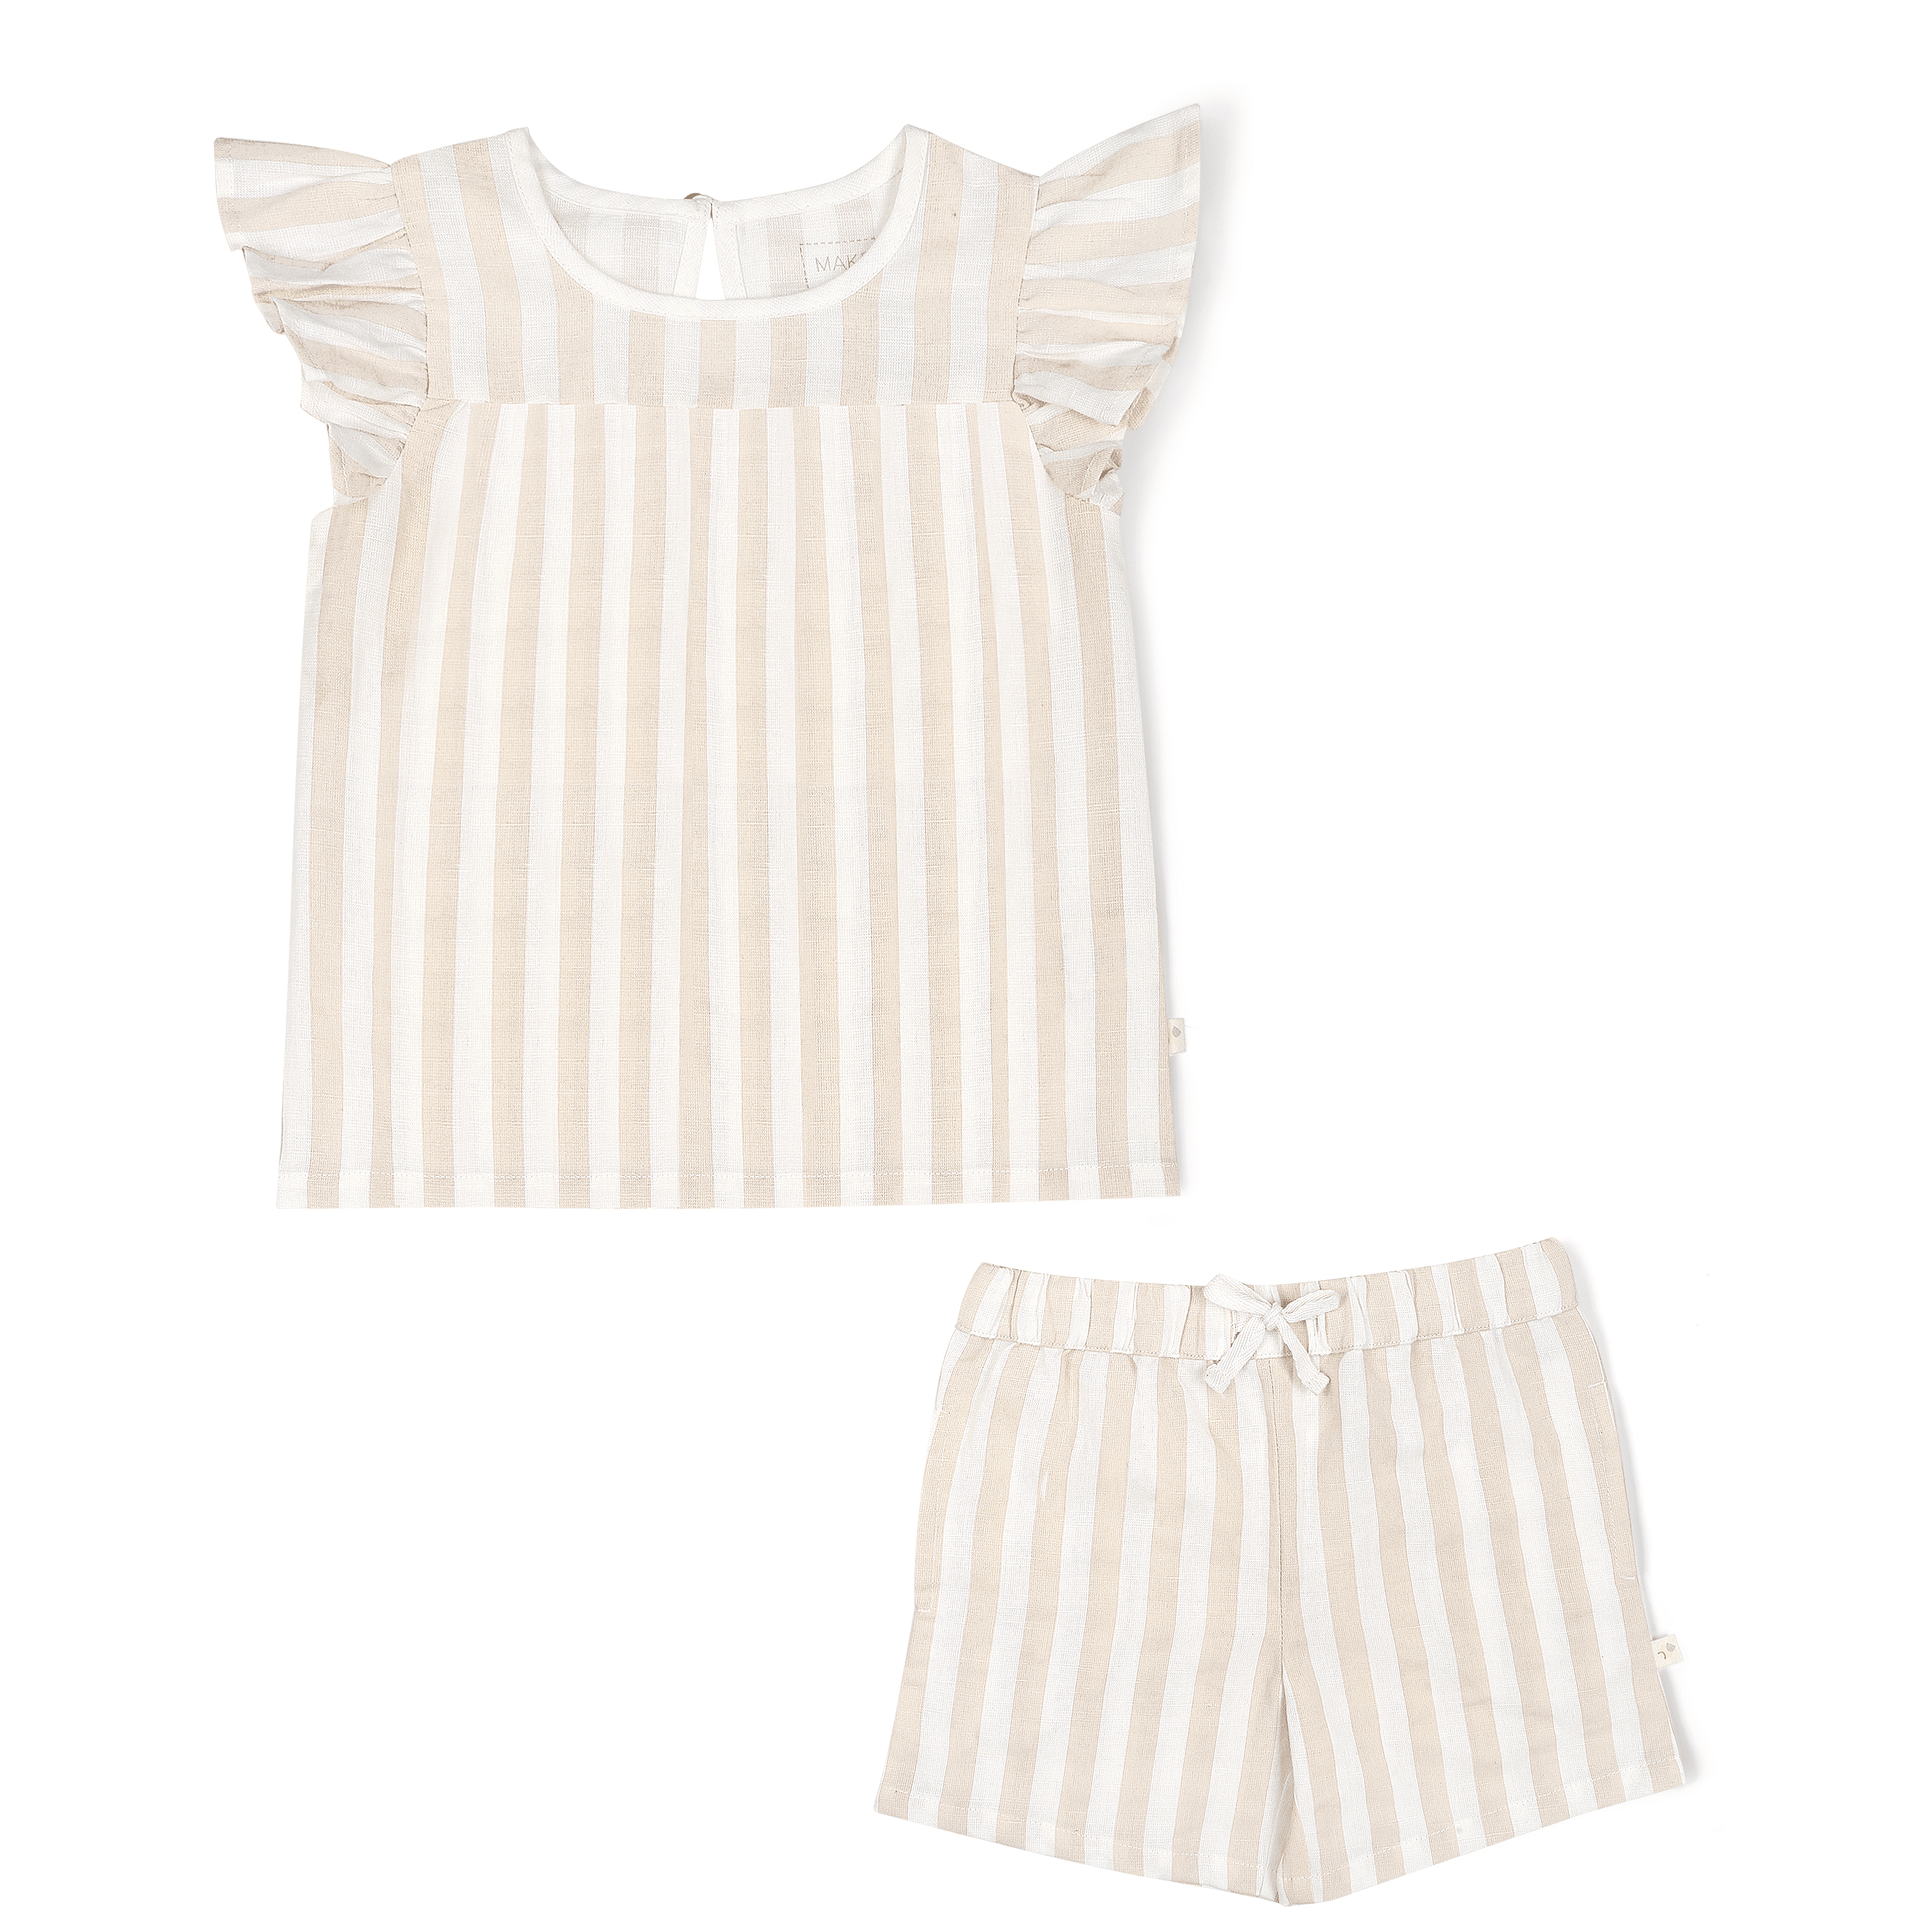 A Makemake Organics Organic Linen Flutter Top and Shorts in Beige Stripes displayed against a white background, consisting of a ruffle-sleeve top and matching drawstring shorts.